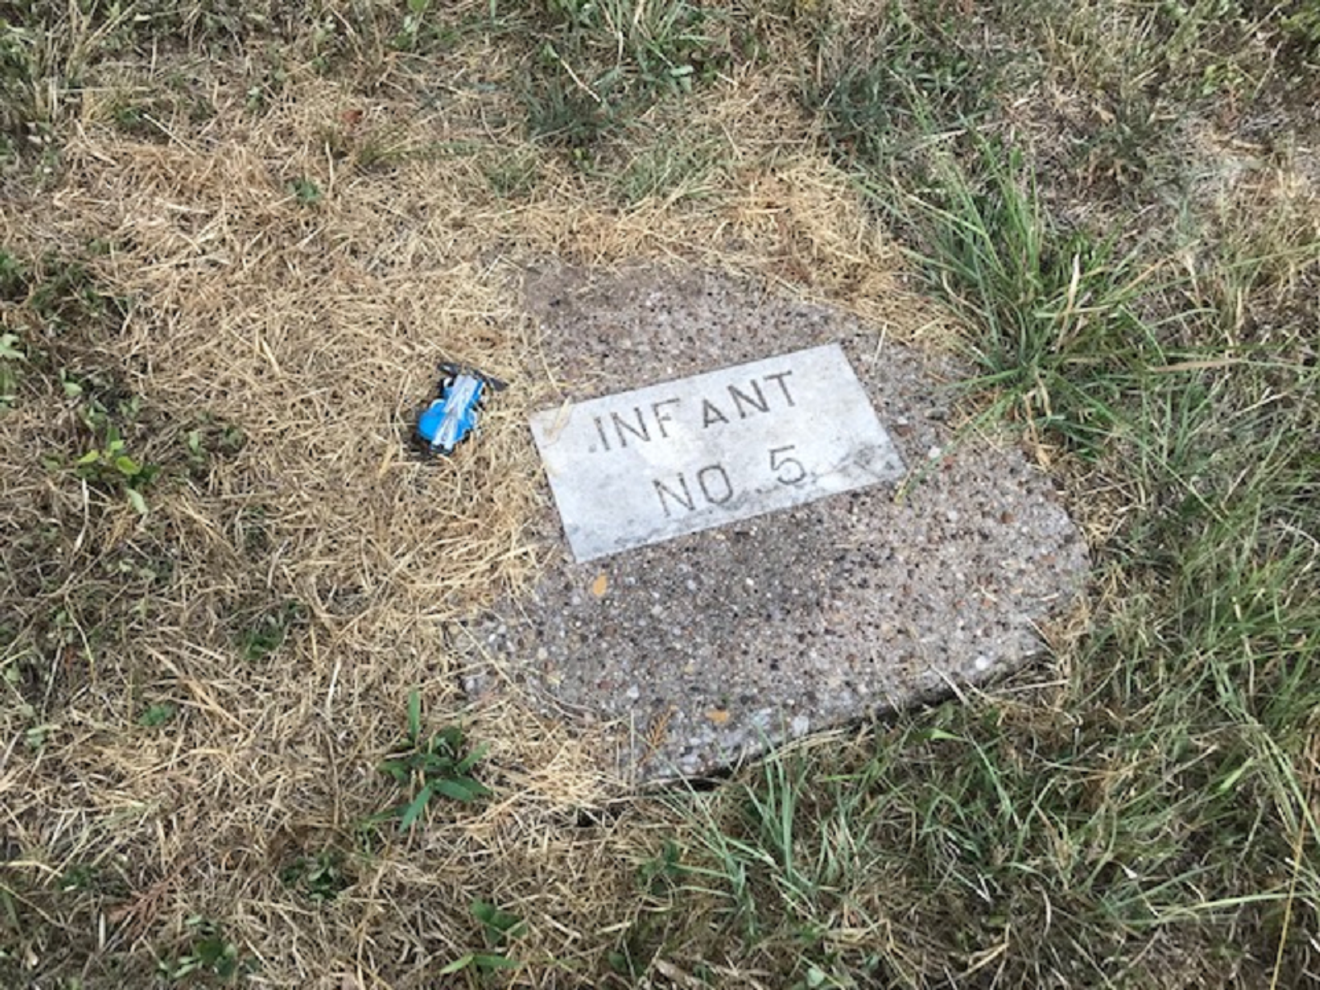 All cemeteries are creepy, but Arlington has one called the "Lost cemetery of Infants." How is that not a Stephen King movie?